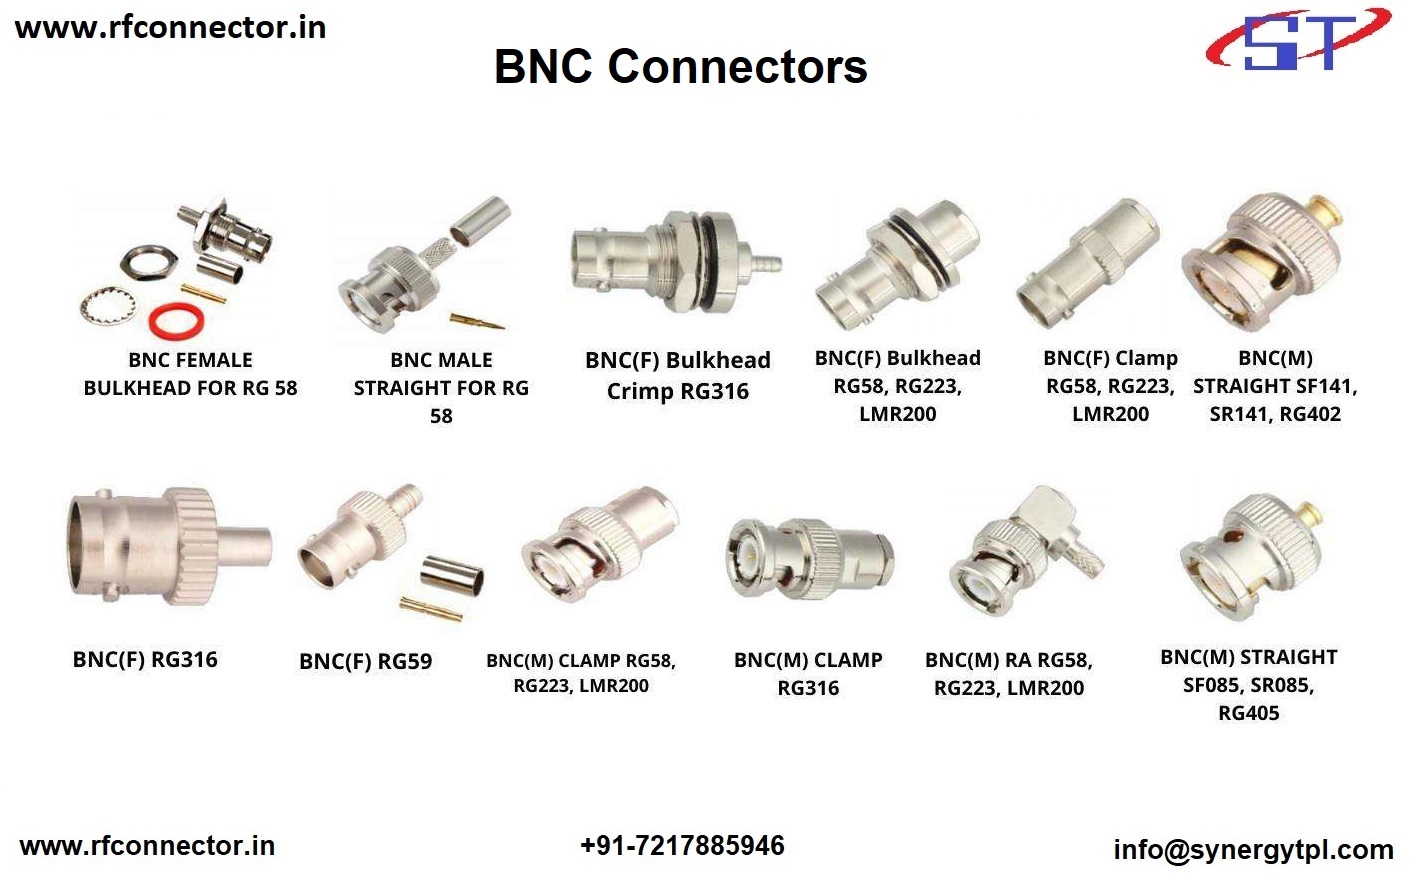 SMA male connector for RG 141 suco cable